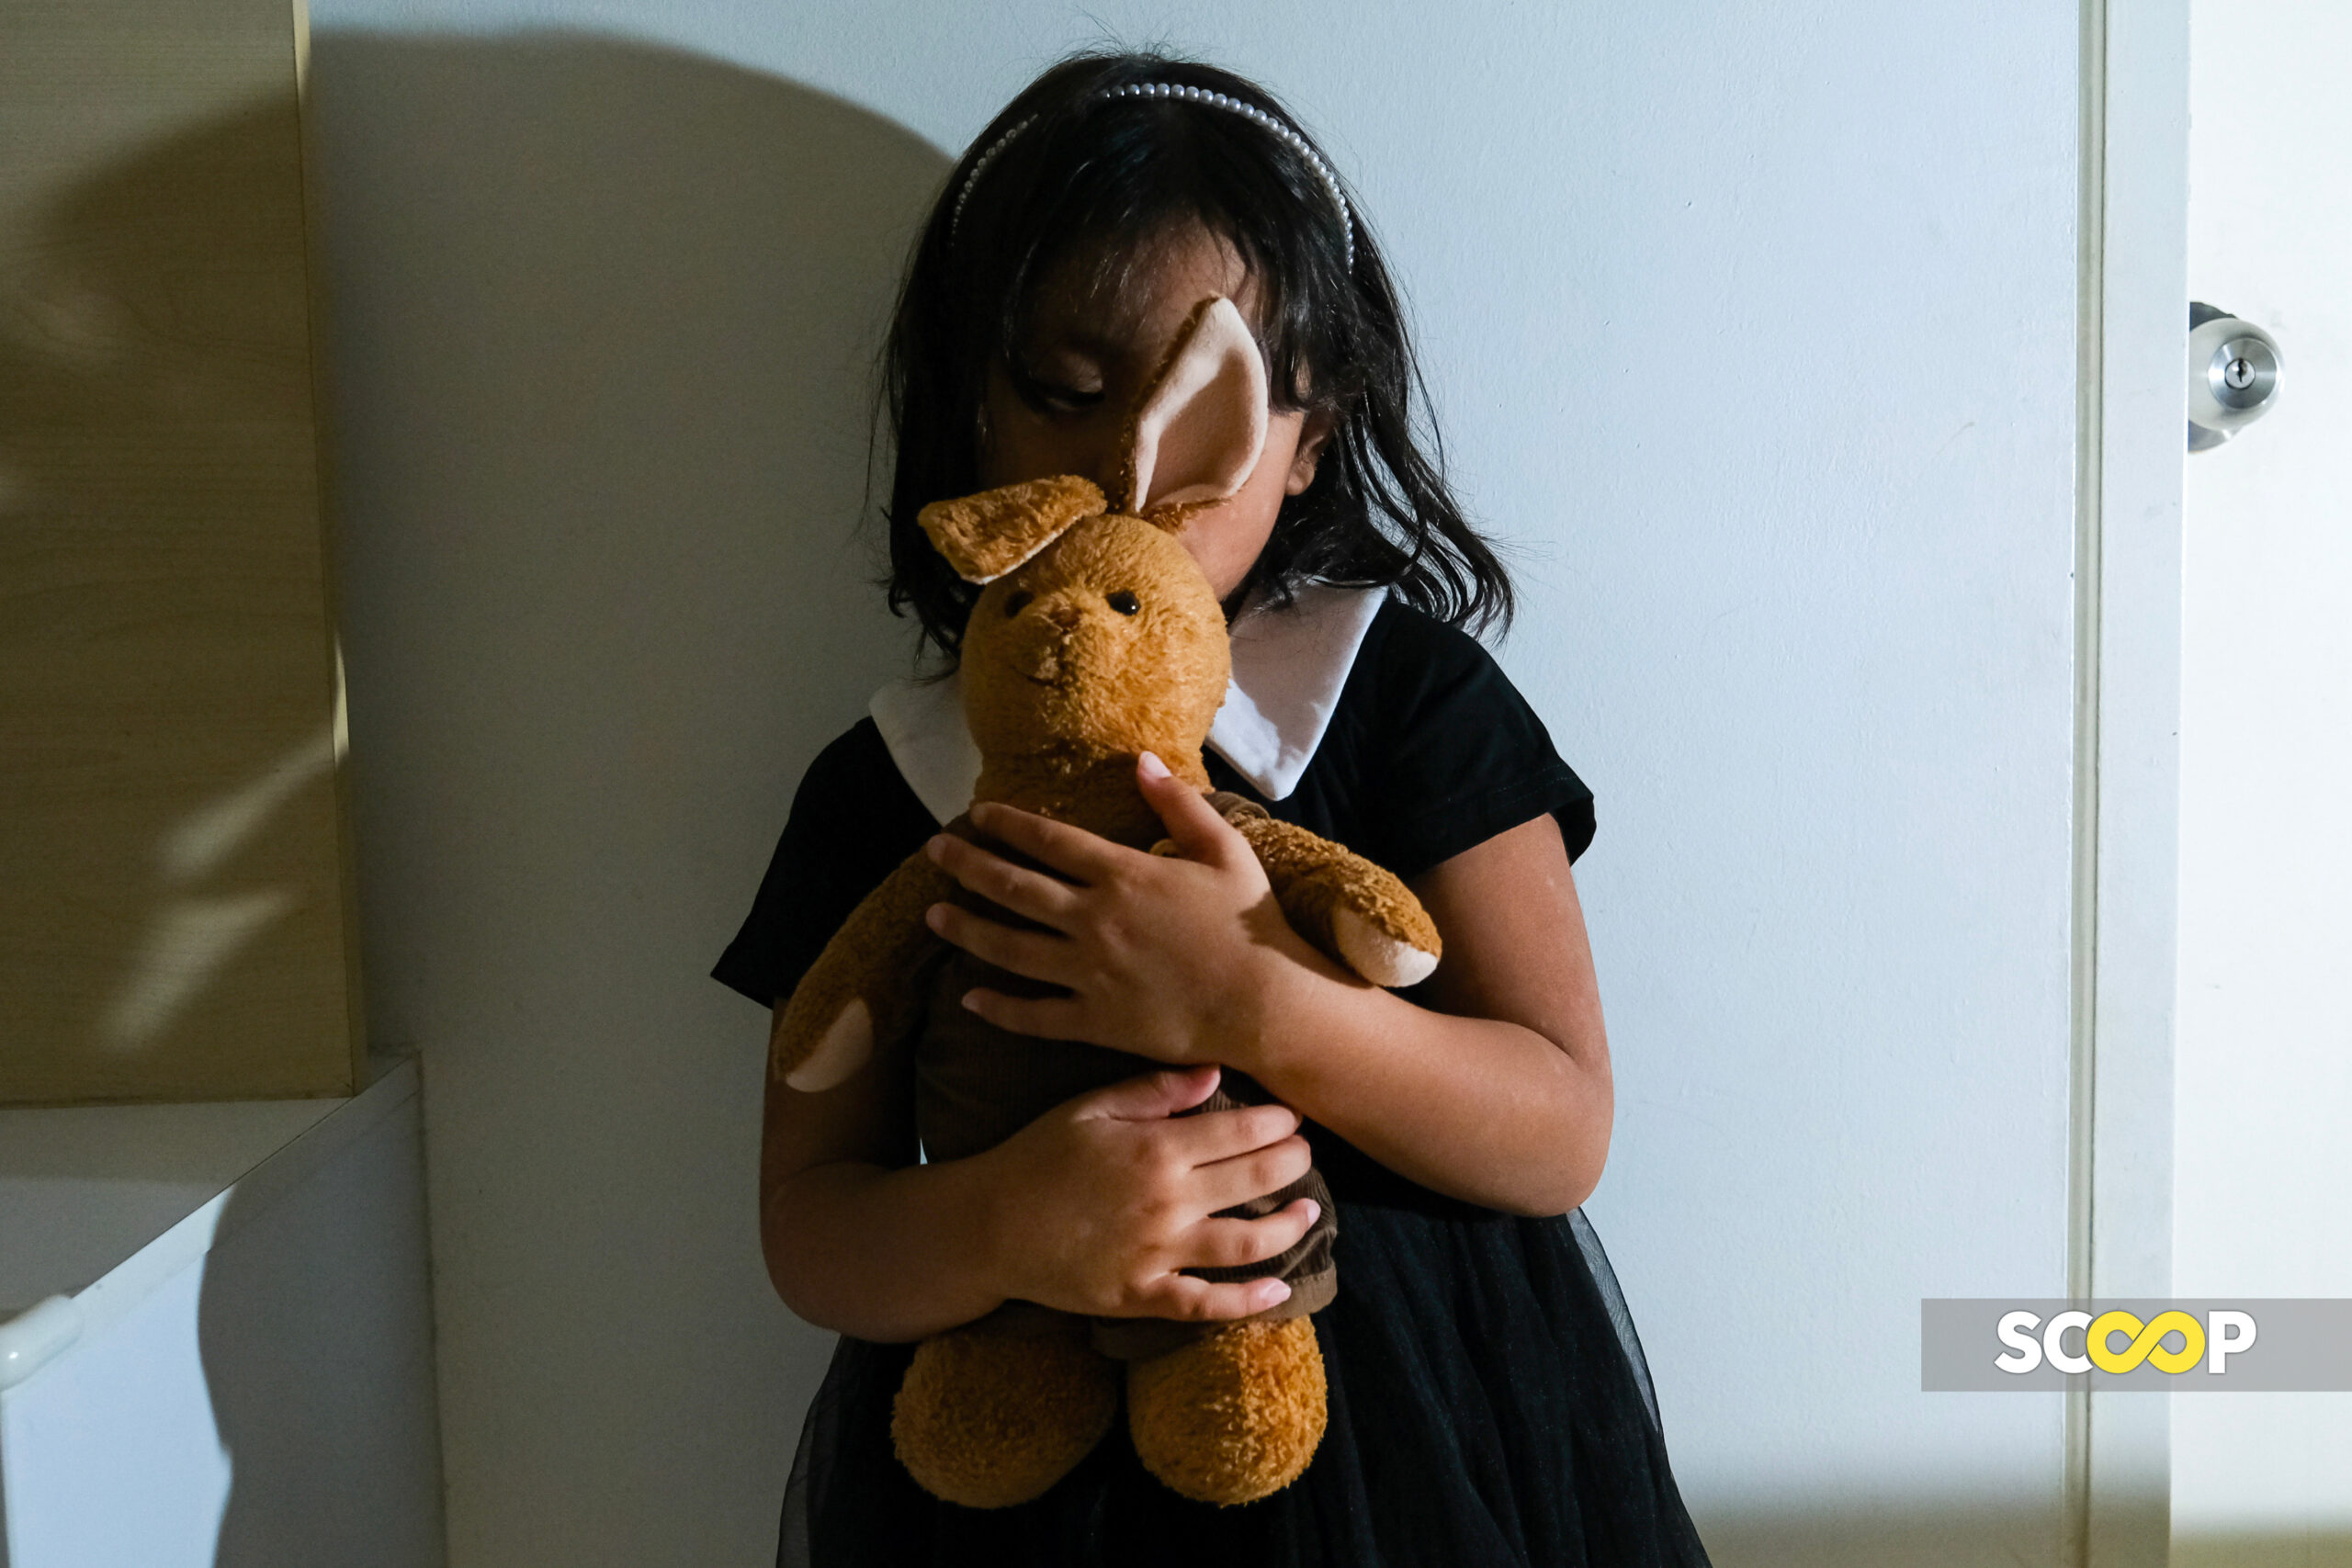 Current state of children’s rights in Malaysia unacceptable – child rights advocates